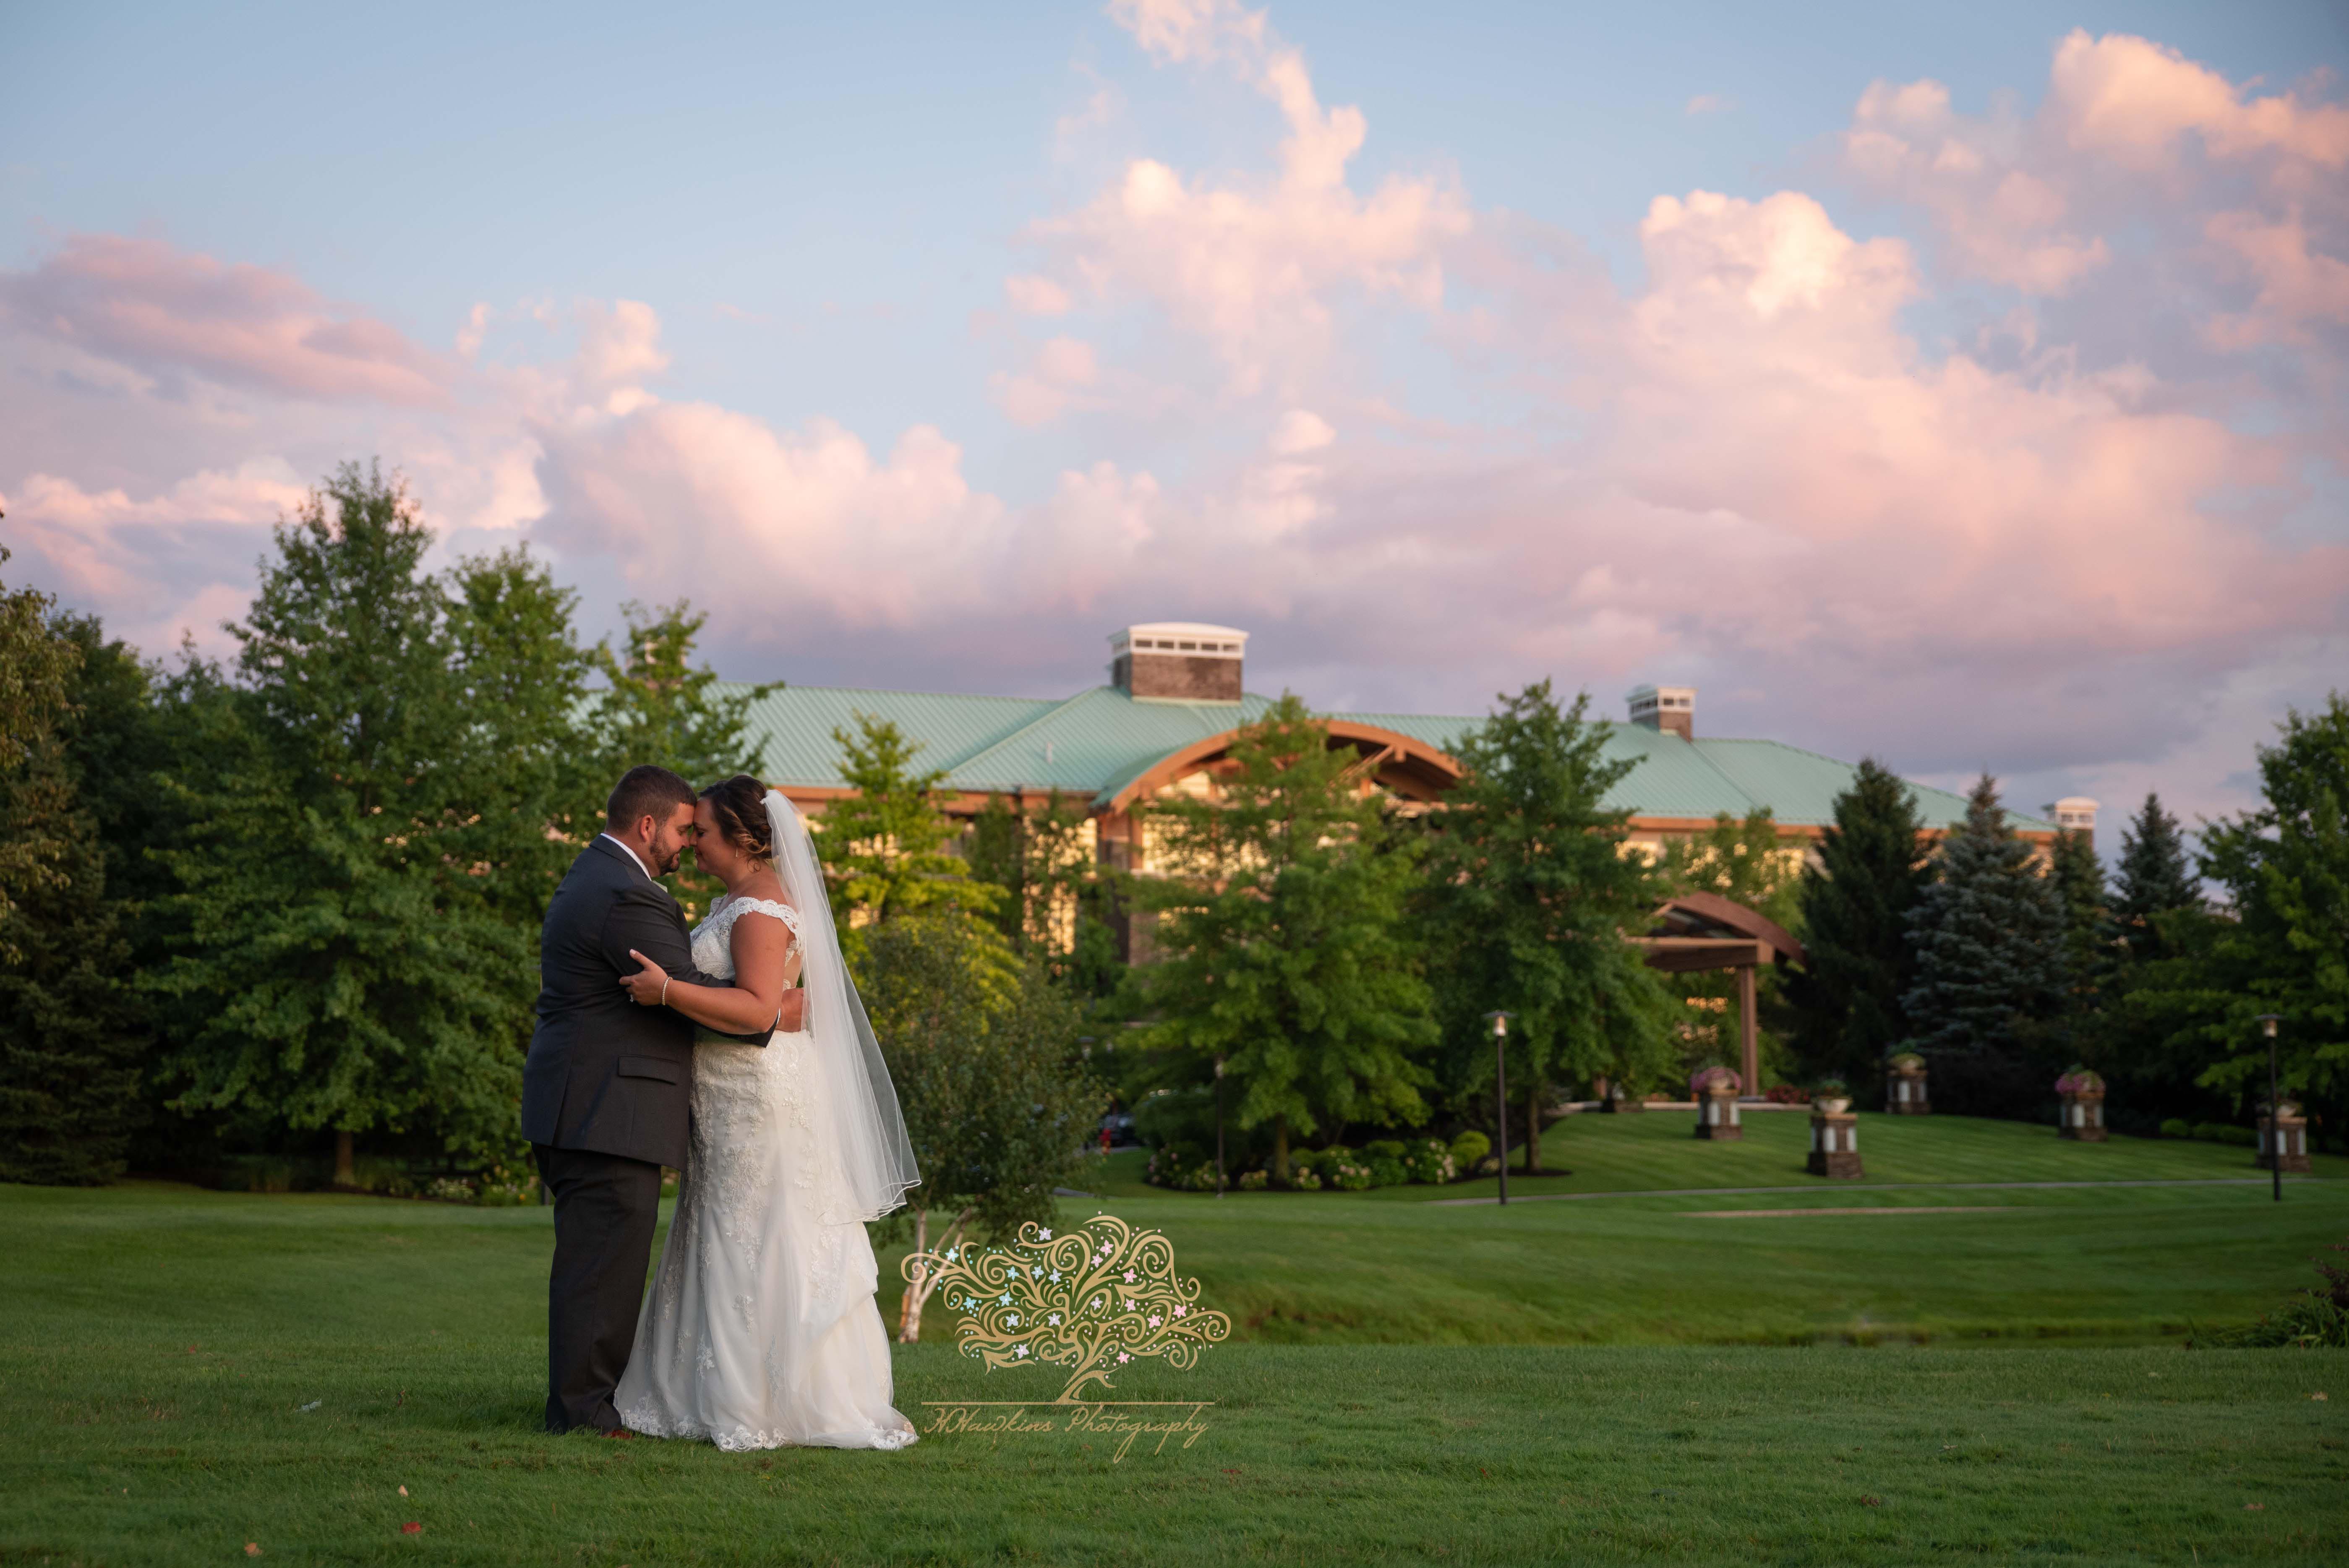 Bride and groom on lawn of Turning Stone's Lodge with colored sunset clouds in the sky